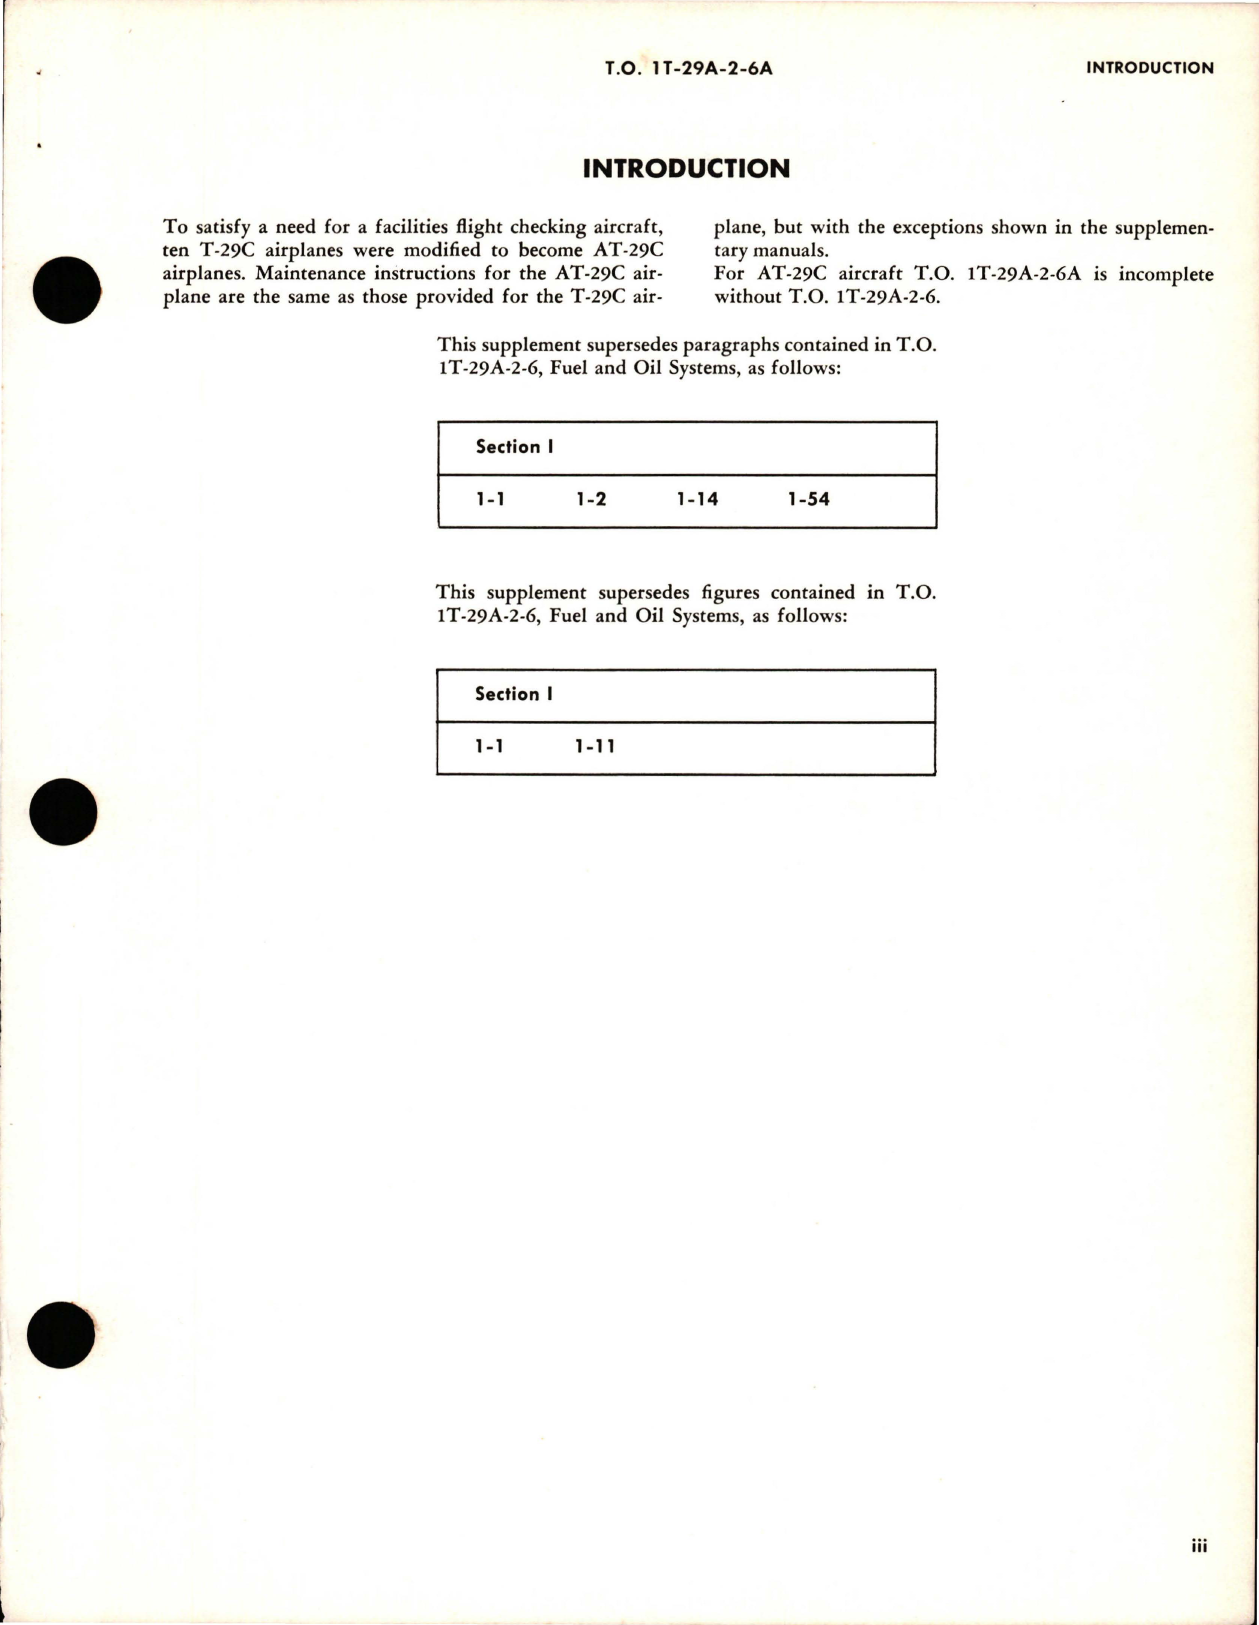 Sample page 5 from AirCorps Library document: Supplement to Maintenance for Fuel and Oil Systems for AT-29C